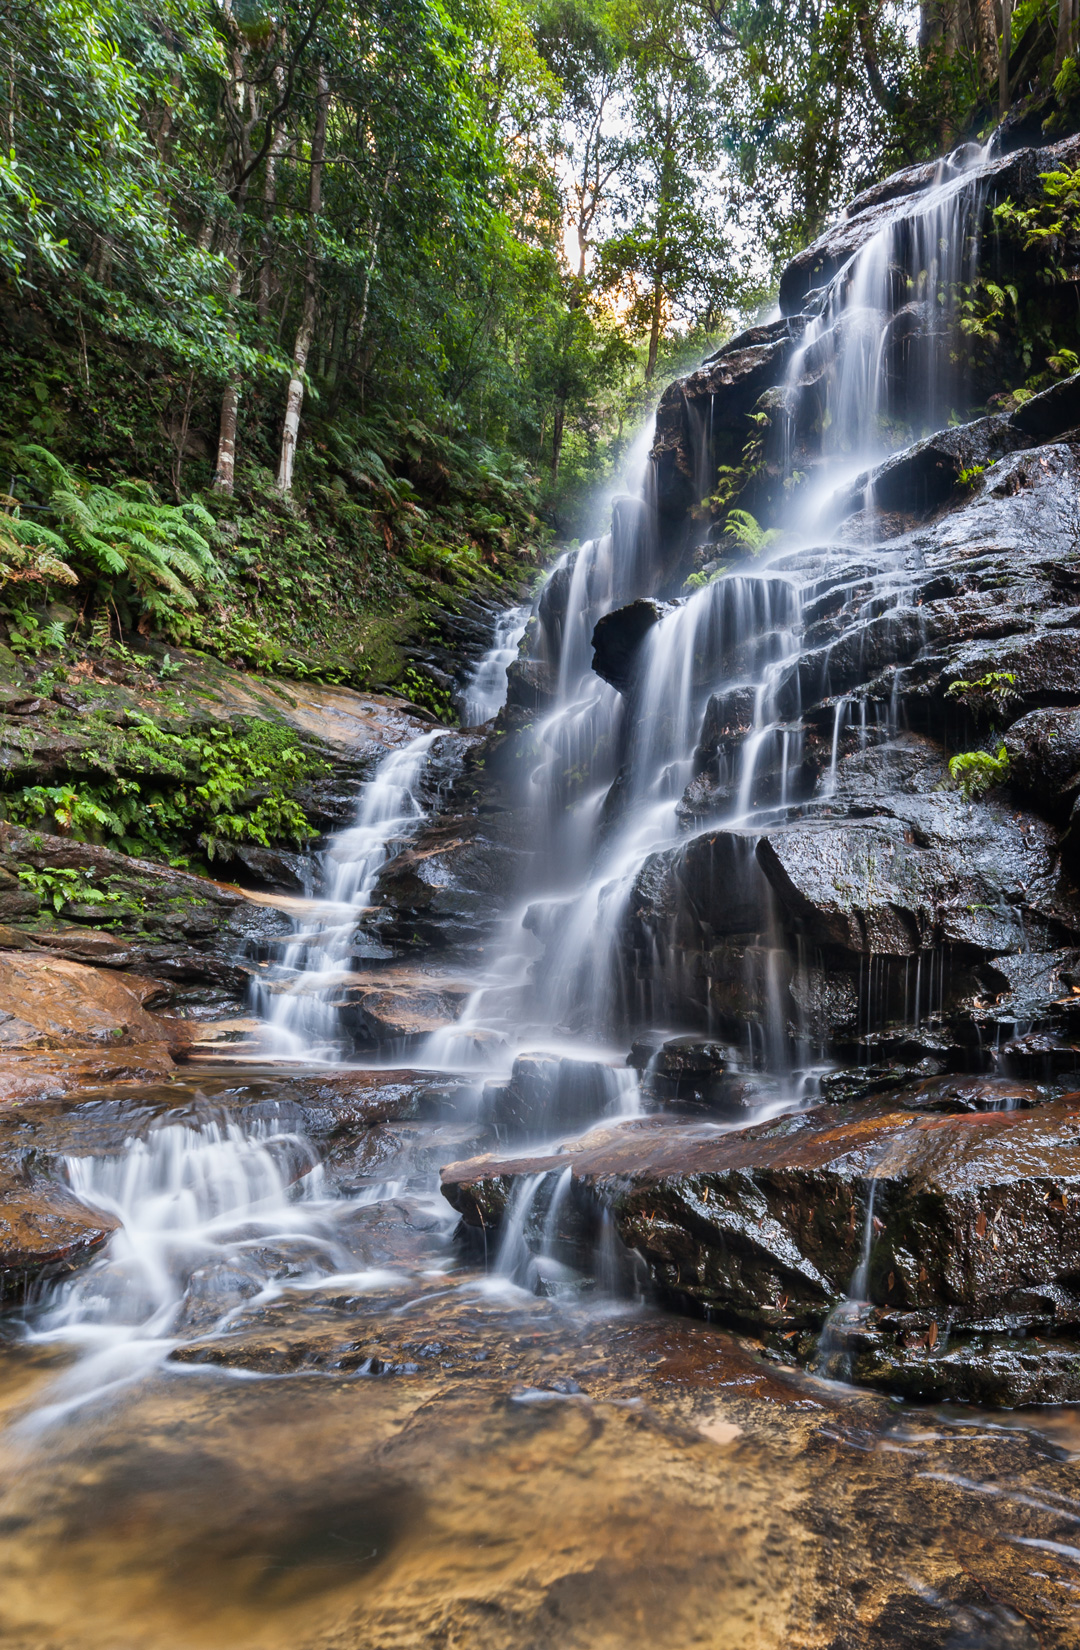 Plan Your Weekend Bushwalk Around The Most Jaw-Dropping ...